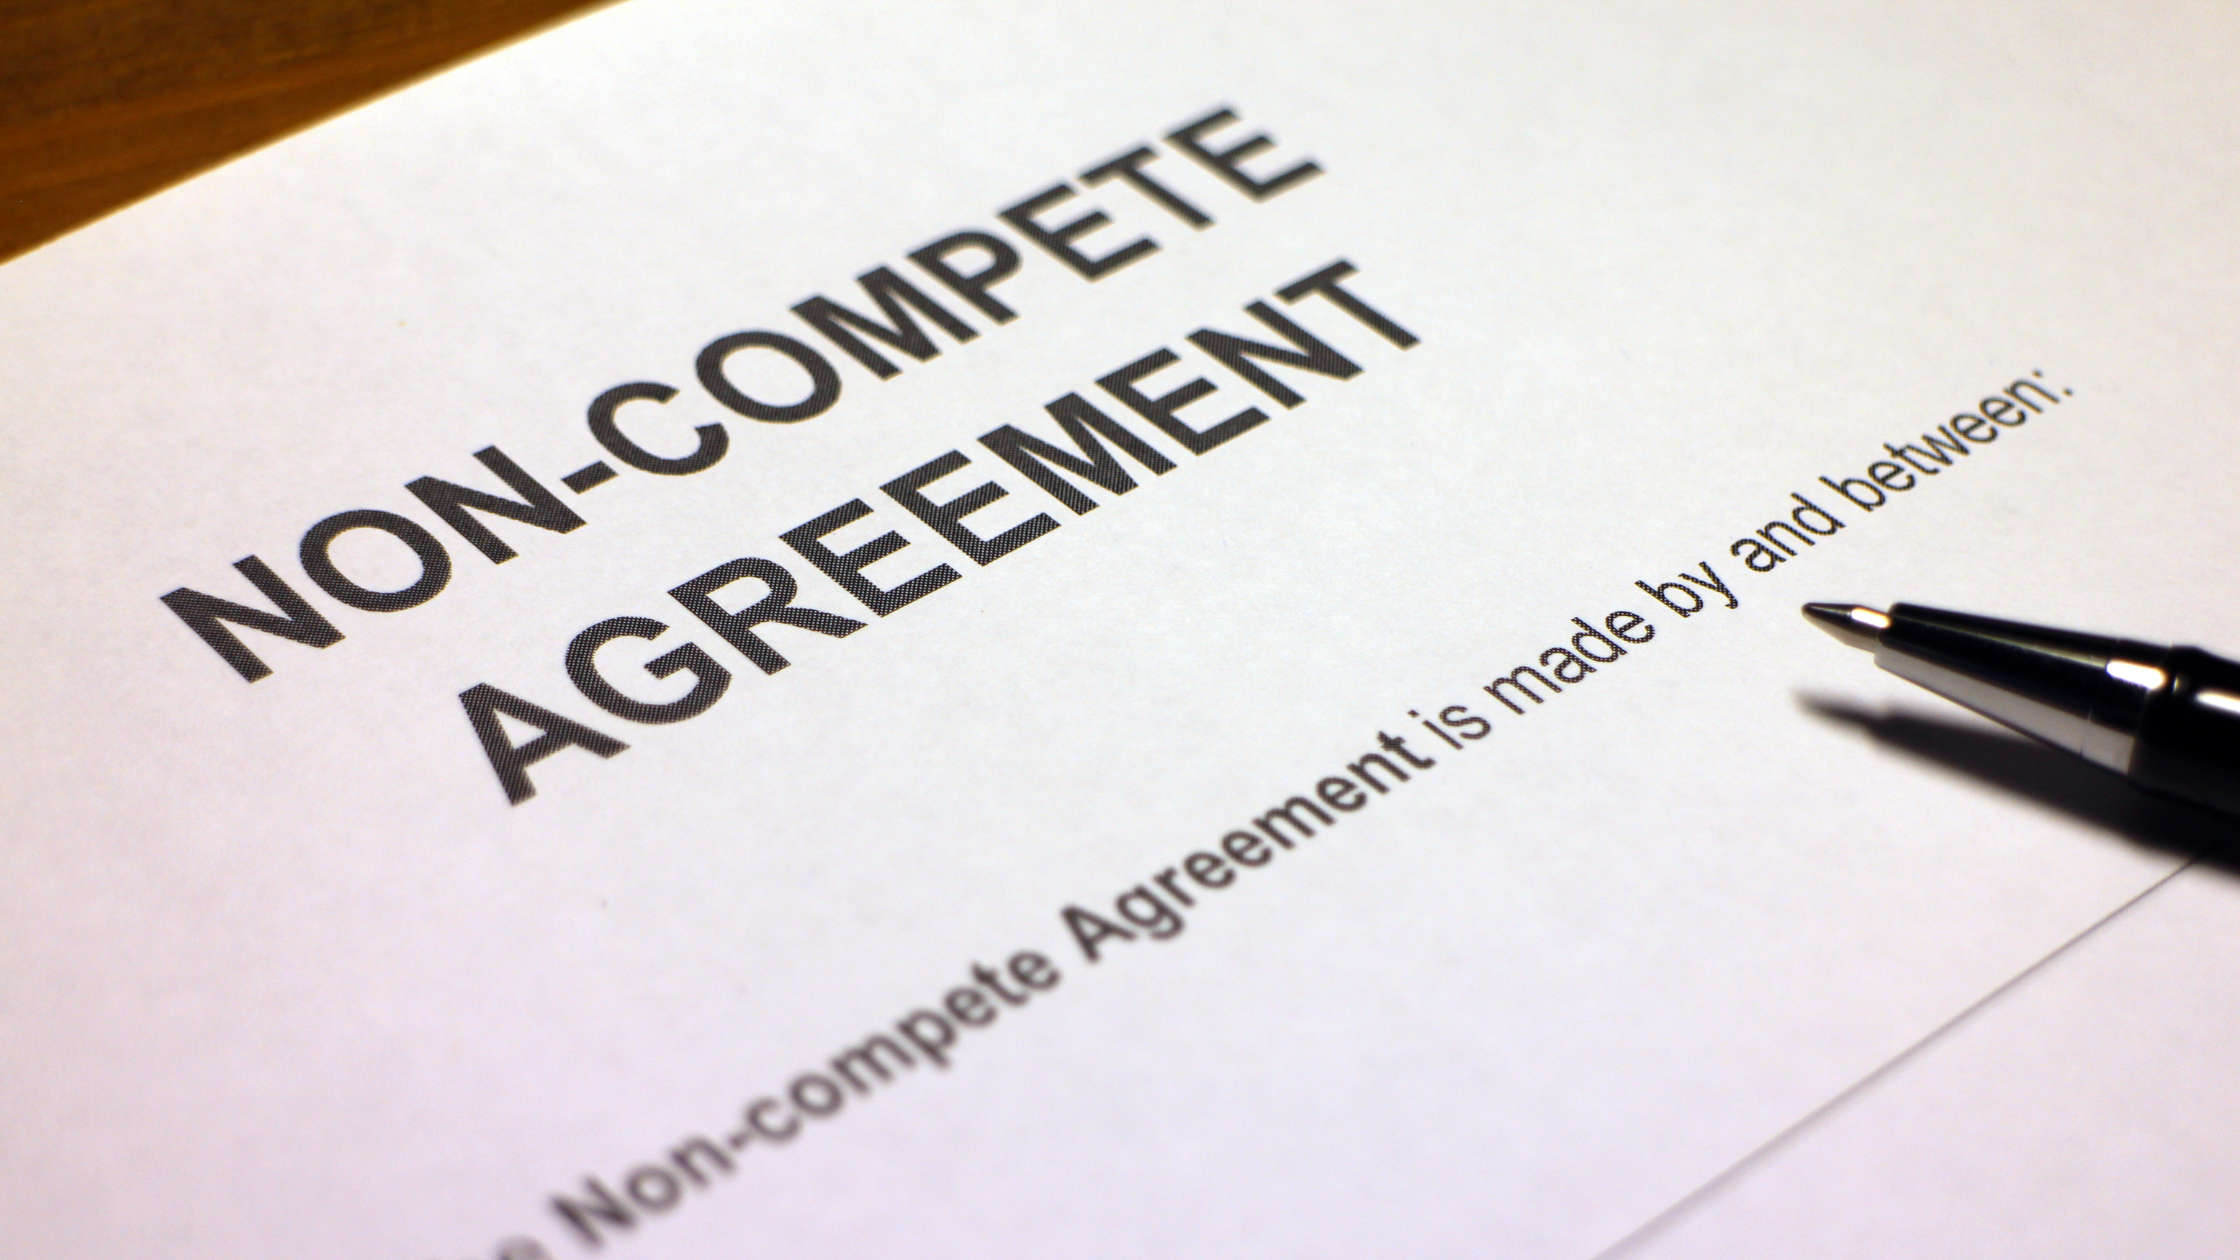 What Every Logistics Professional Should Know About Non-Compete and Non-Solicit Agreements